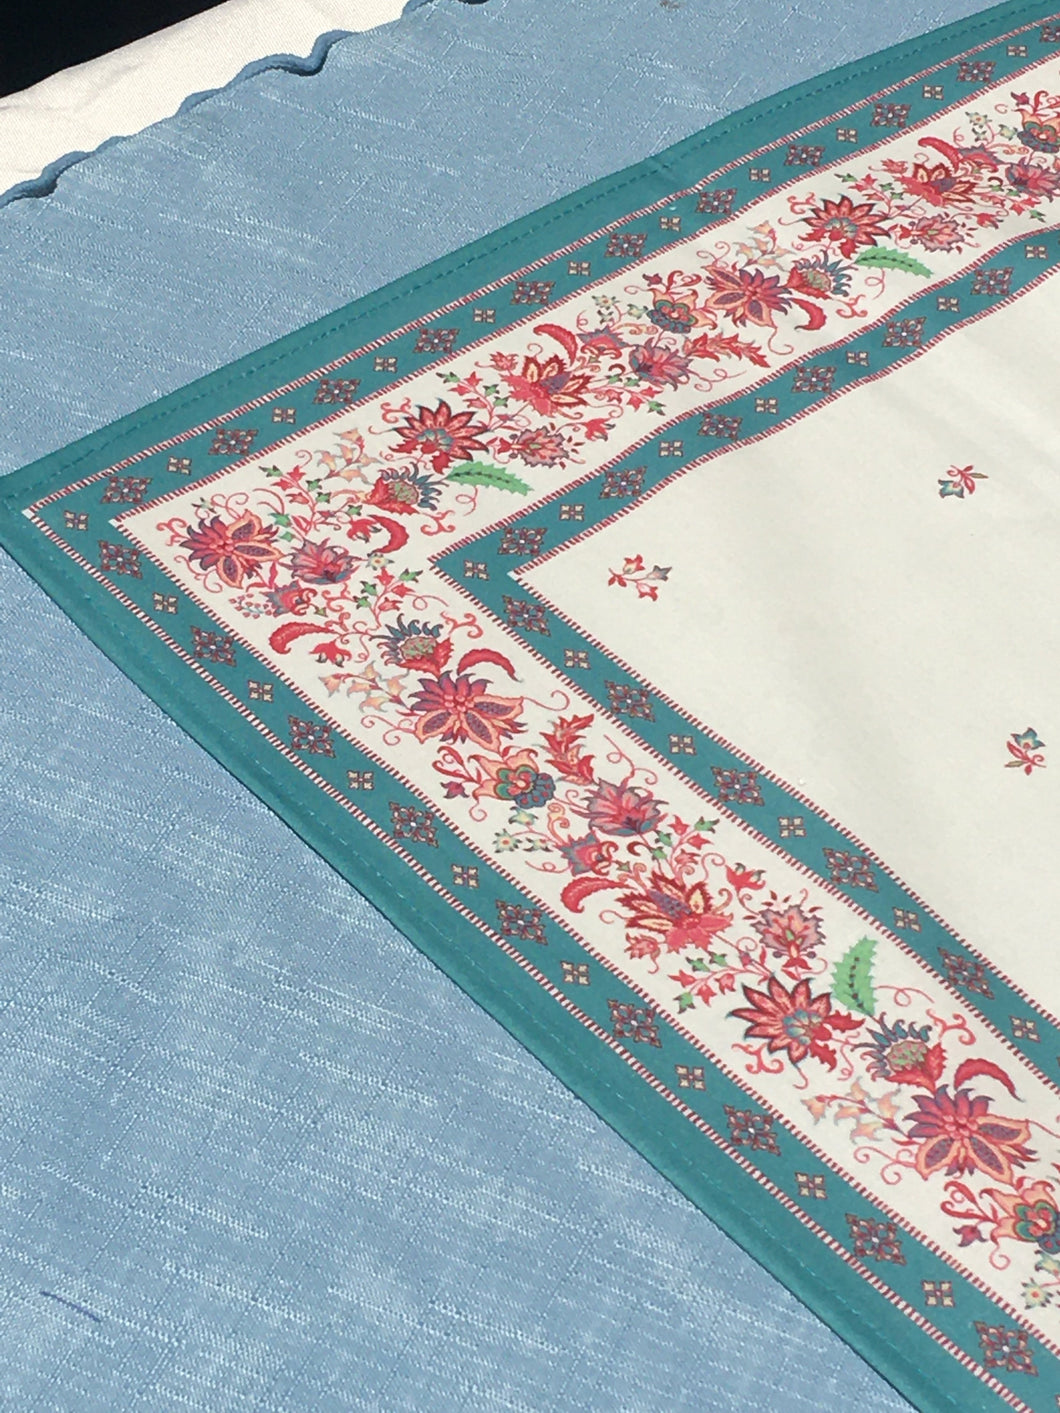 Anti stain wipe clean finish allows for liquids and oils to bead off. Measures 16.5 by 60 in. Pictured on a 72 inch length table for reference, but may be draped over the sides of a smaller table as well. Border color is blue turquoise and background is white eggshell with multicolor provincial flora.